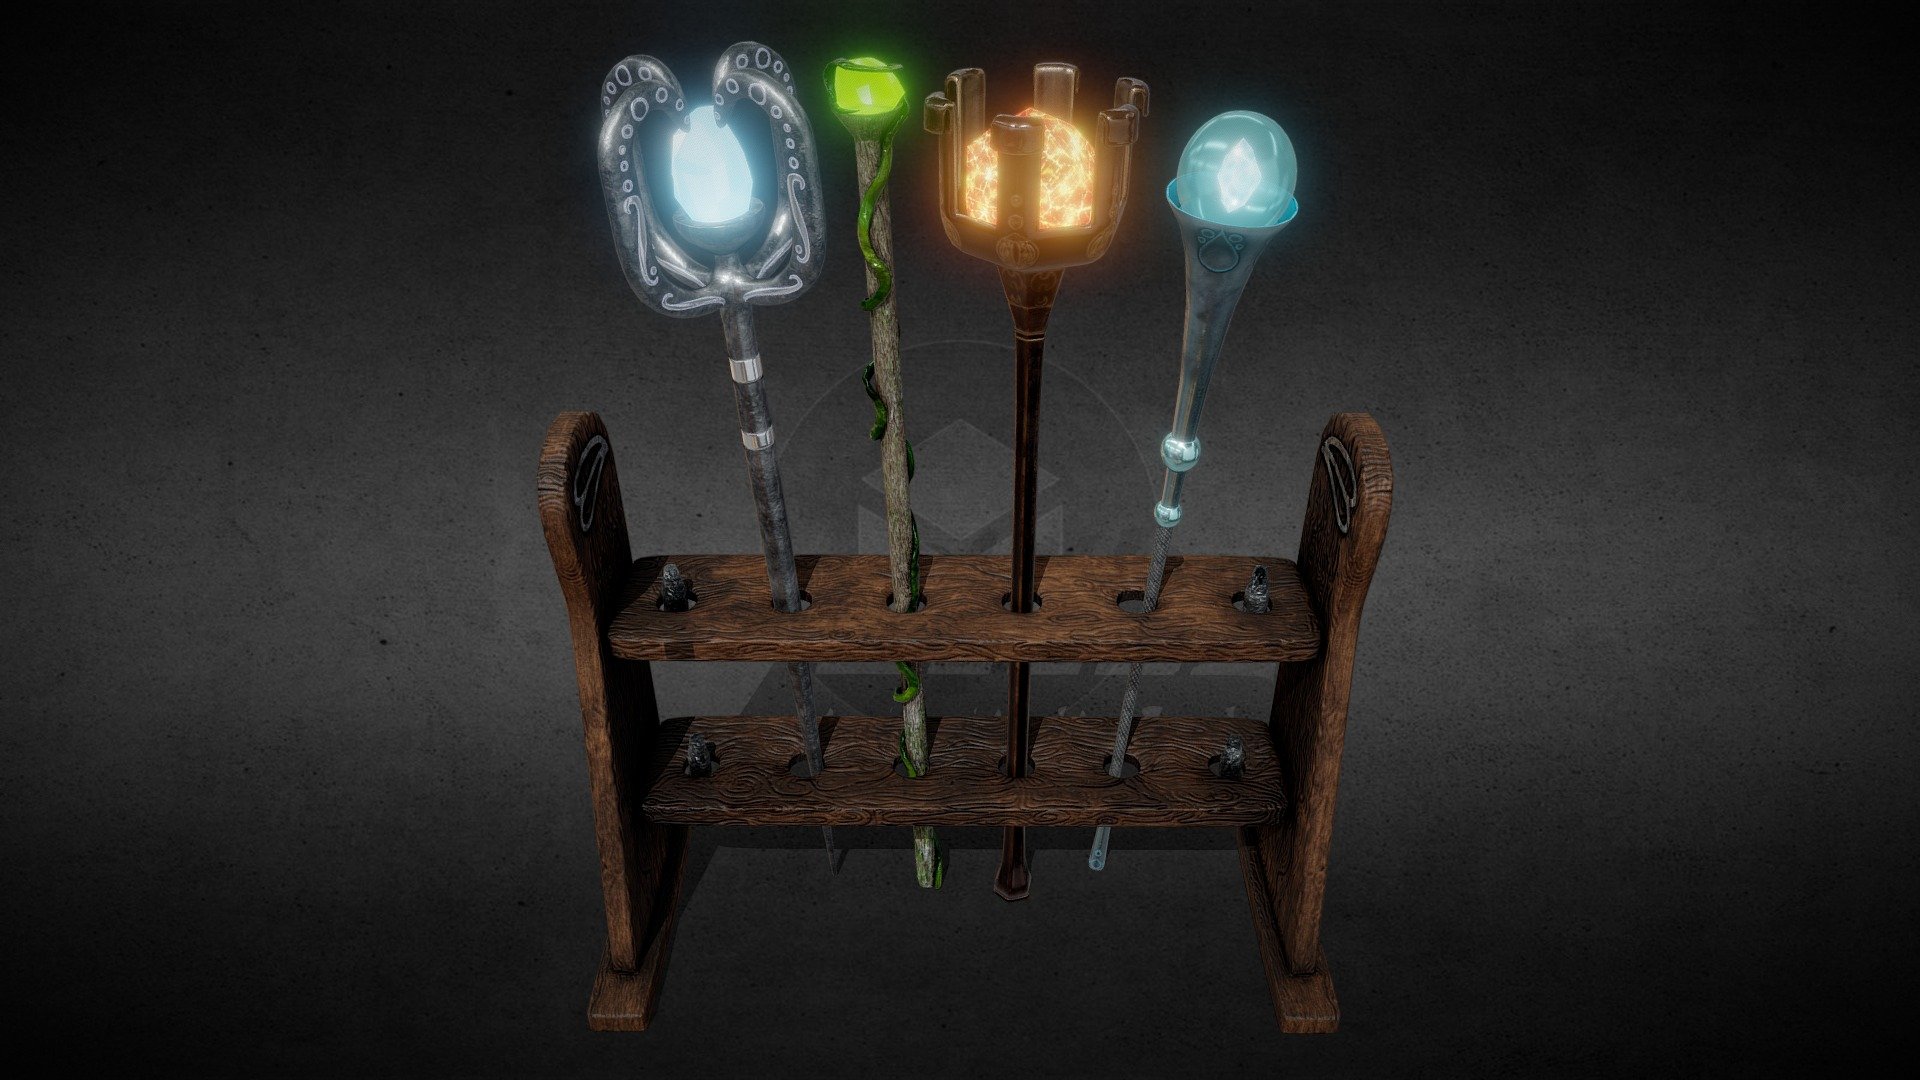 Every element has it's own magical mysteries. If you want to discover them, you have to use every wand!



Set includes:
- Wodden Stand
- Fire-Wand
- Air-Wand
- Earth-Wand
- Water-Wand

Every wand and the wodden stand can be used indiviually.



4K Textures (4096x4096px)

LowPoly-Asset for Video &amp;/or Games 



Made with: 3Ds Max, zBrush, Substance Painter, Photoshop



– Further assets on the topic are being worked on. – - [Set] Magical Element Wands on a wooden Stand - Buy Royalty Free 3D model by MDSDesign 3d model